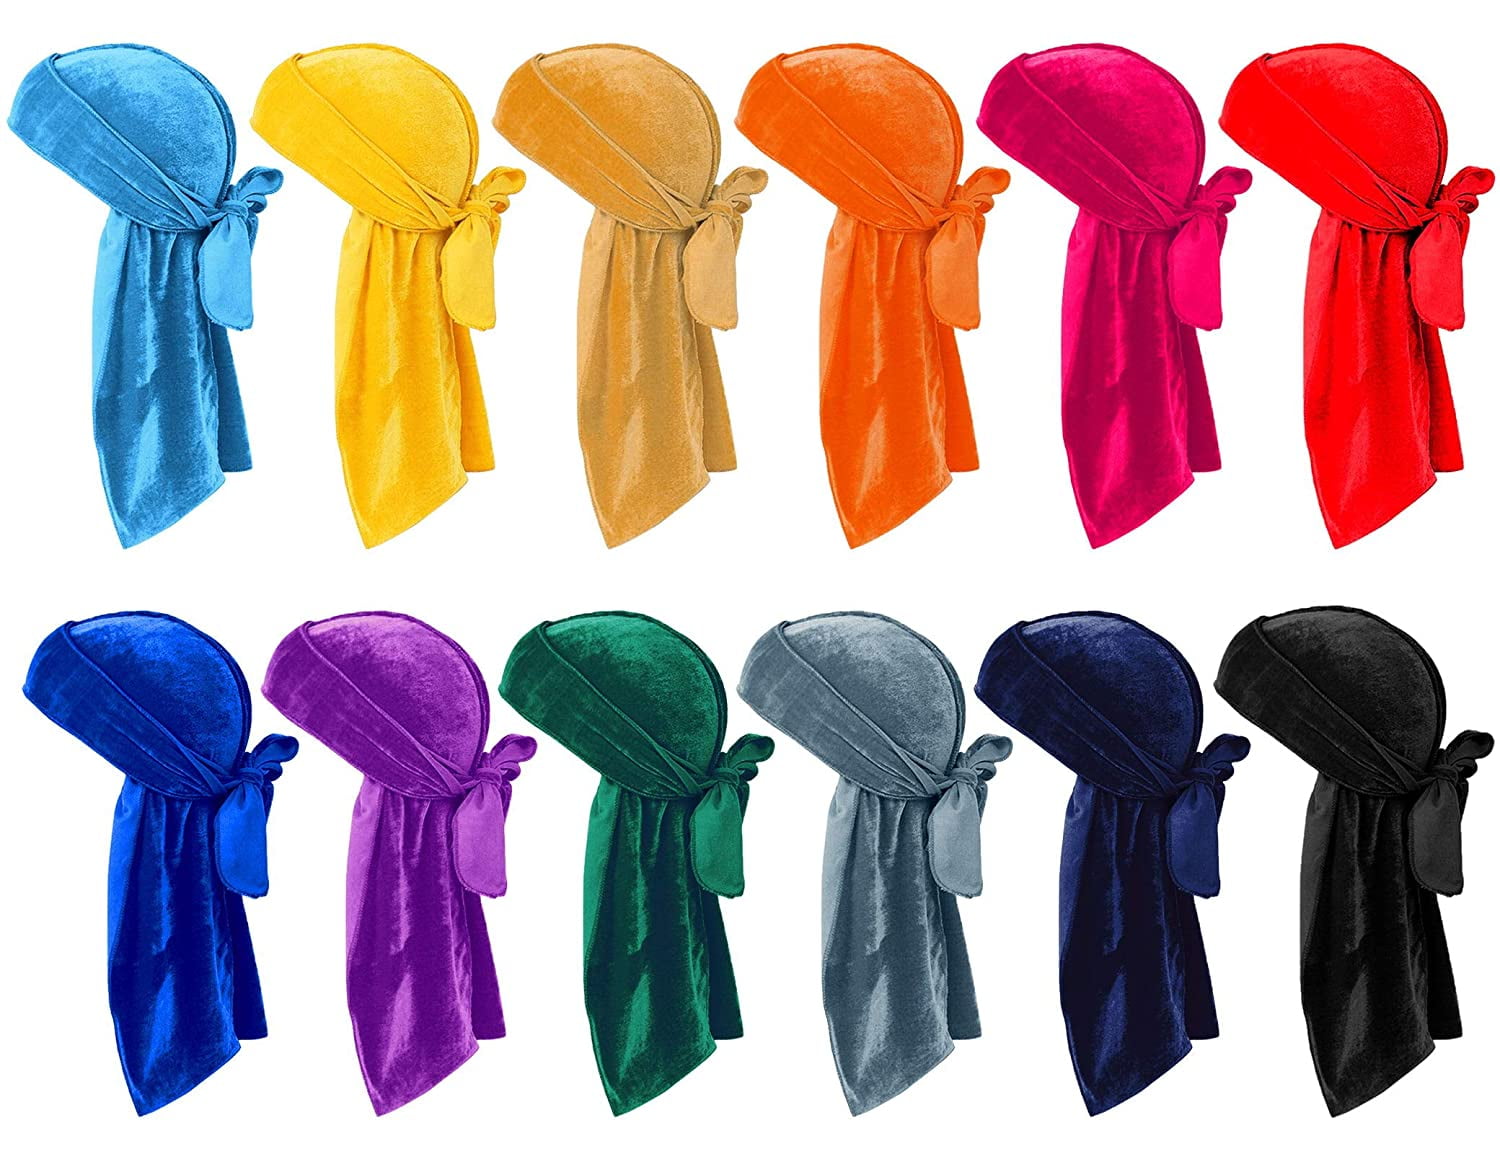 New High Premium Velvet Durag Waves Extra Long Tail And Wide Straps For  Du-rag Make Middle Stitch On Outside Hair Accessories - Hair Ties -  AliExpress